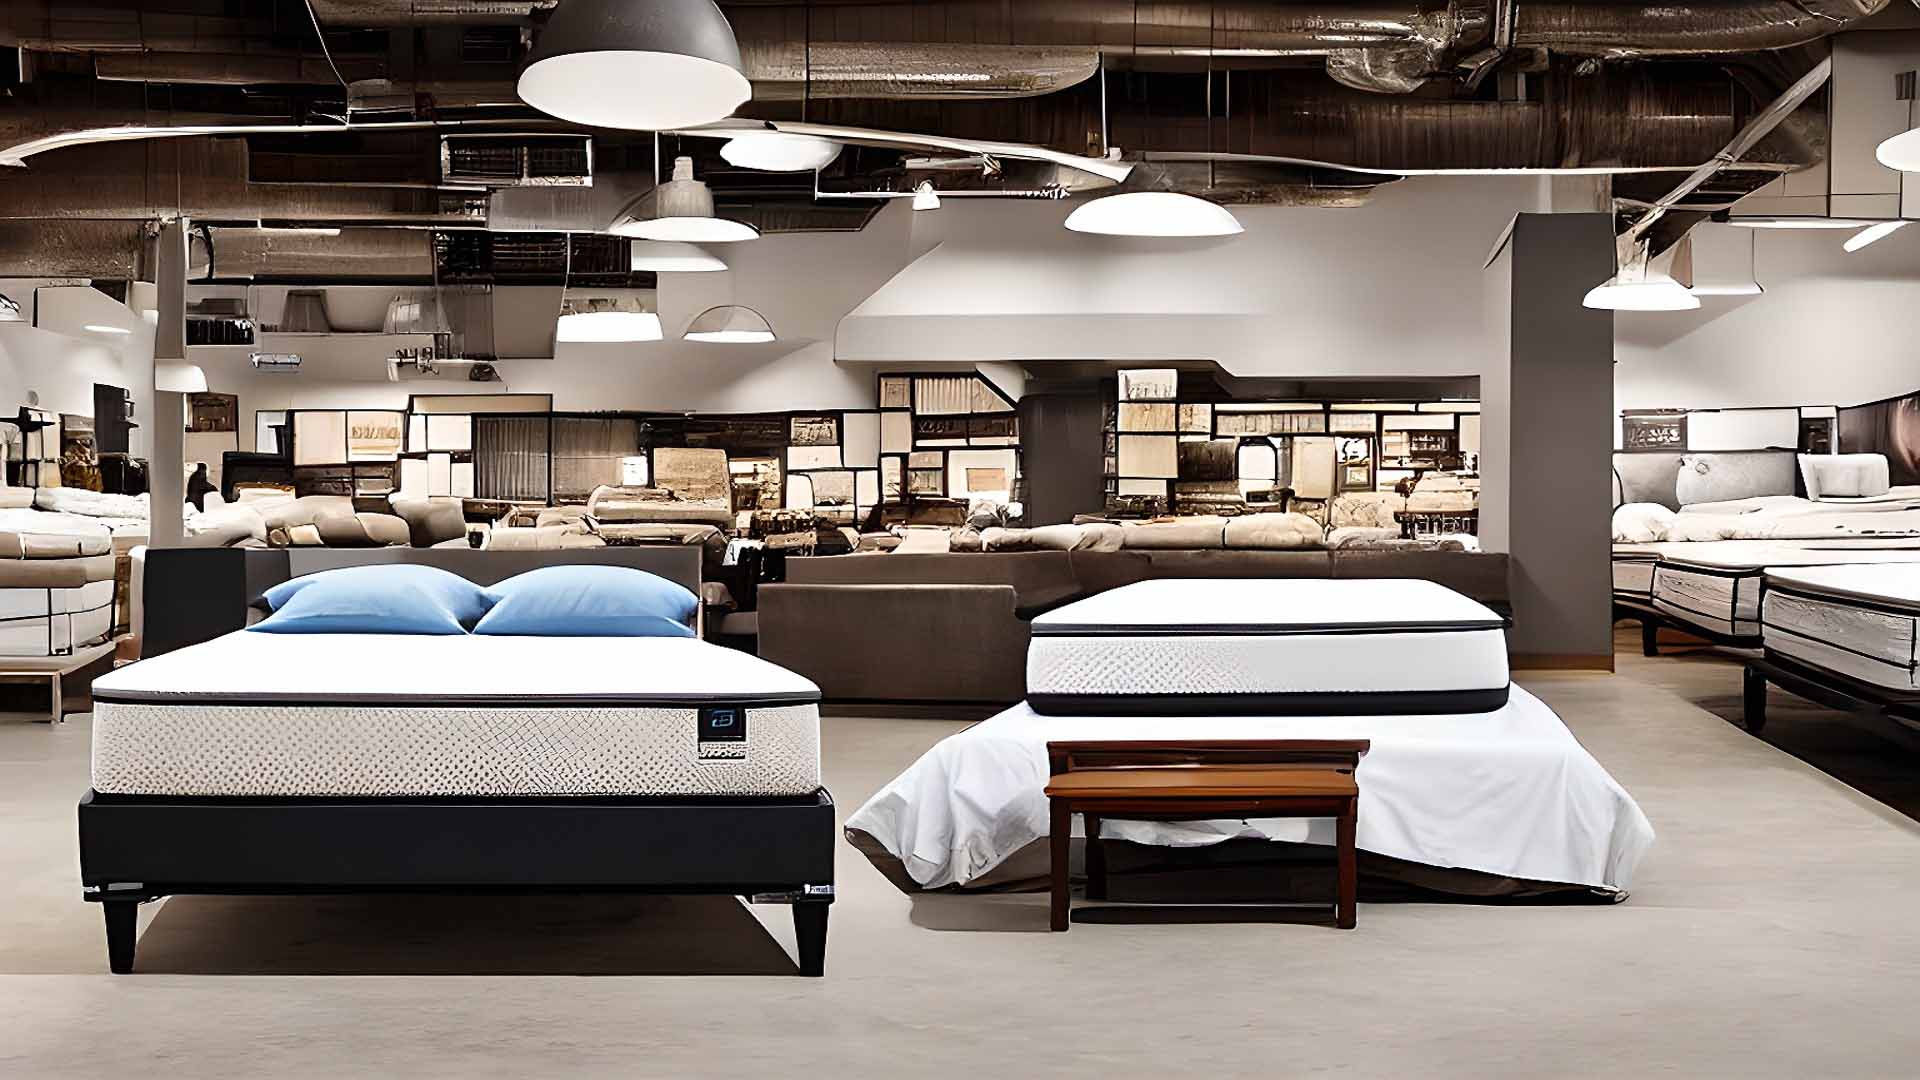 Mattress Outlet Showroom With Queen Beds Austin, TX